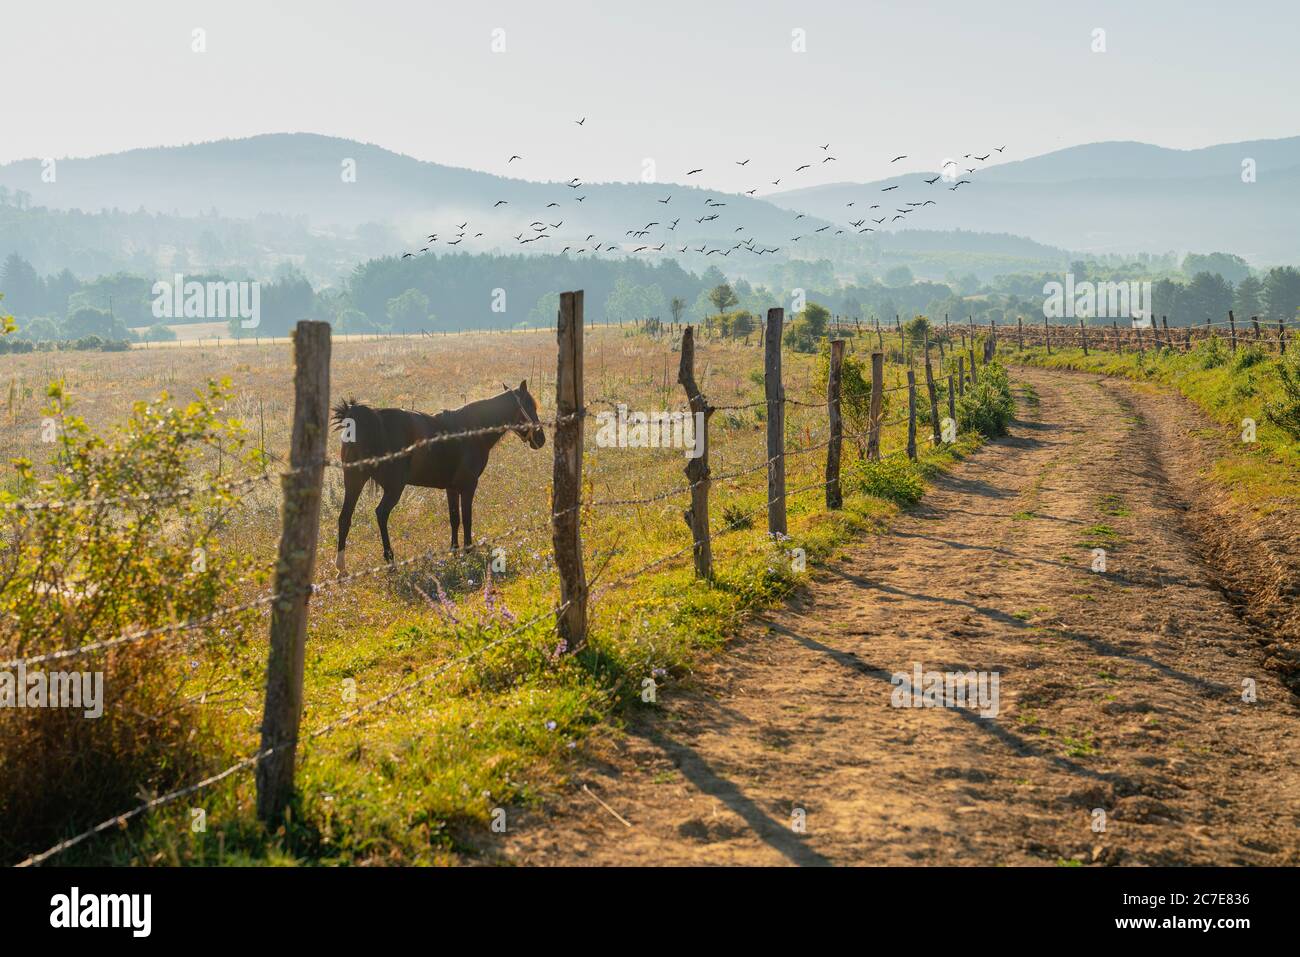 The road to the hills among fields under sun in the morning. Horse grazing behind barbed wire fence next to dirt road or ground road. Daday, Kastamonu Stock Photo